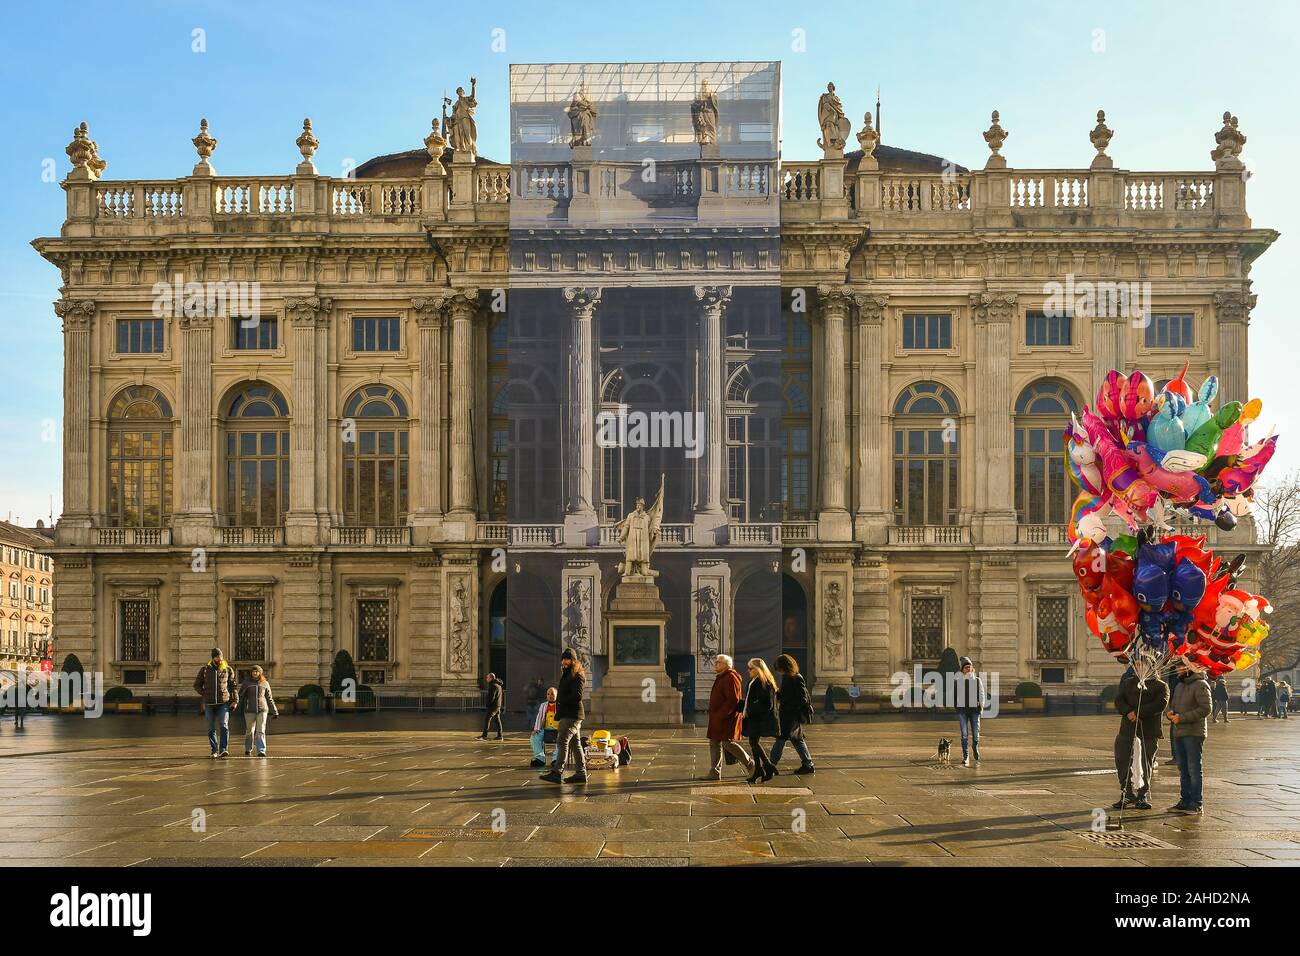 Palazzo Madama by Filippo Juvarra with people walking and a balloon seller in a sunny winter day in Piazza Castello square, Turin, Piedmont, Italy Stock Photo